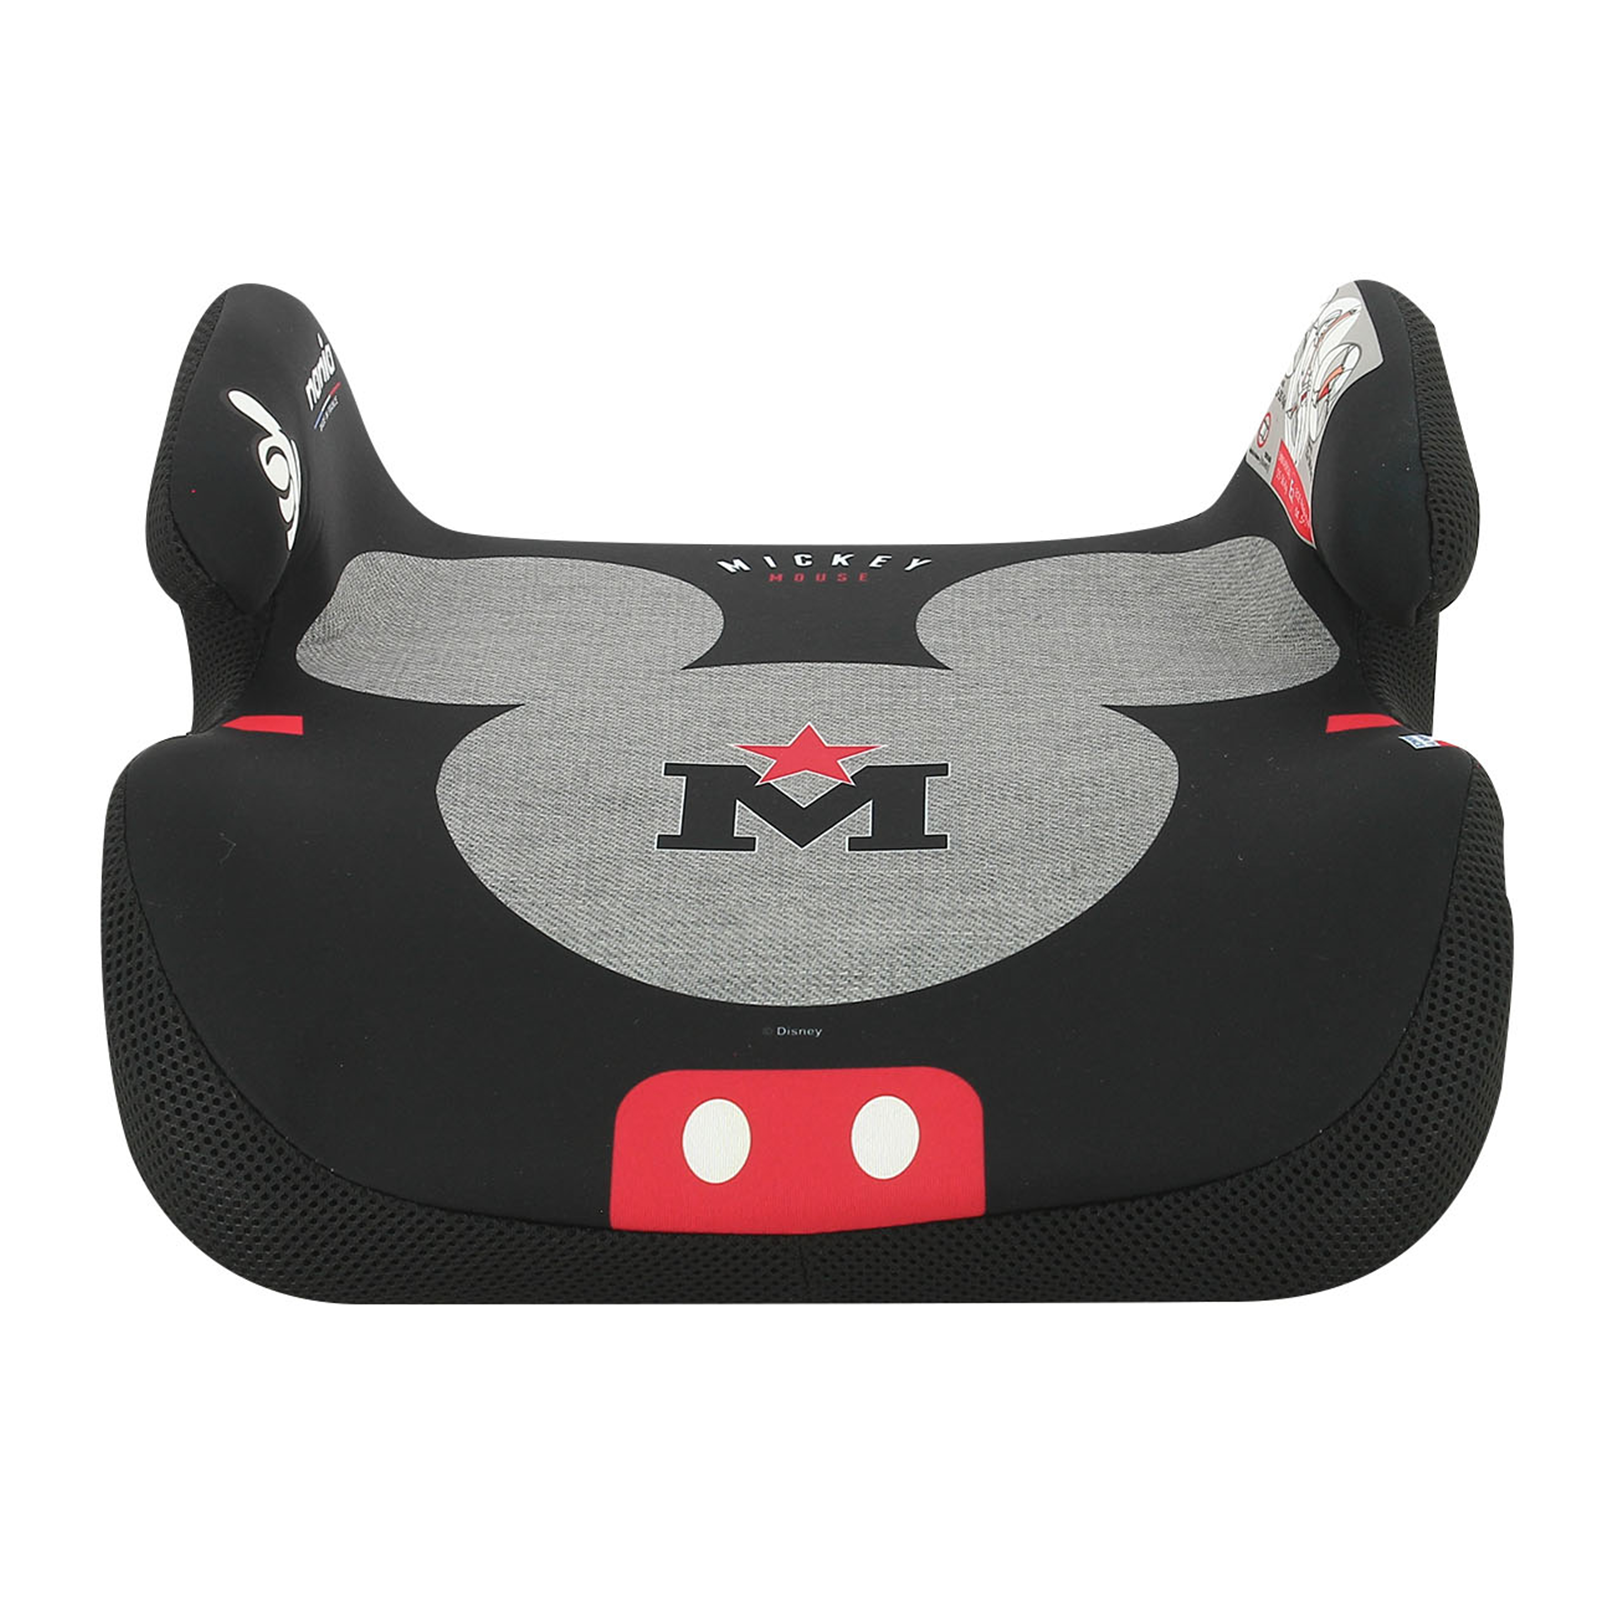 Disney Topo Group 2/3 Booster Car Seat - Mickey Mouse